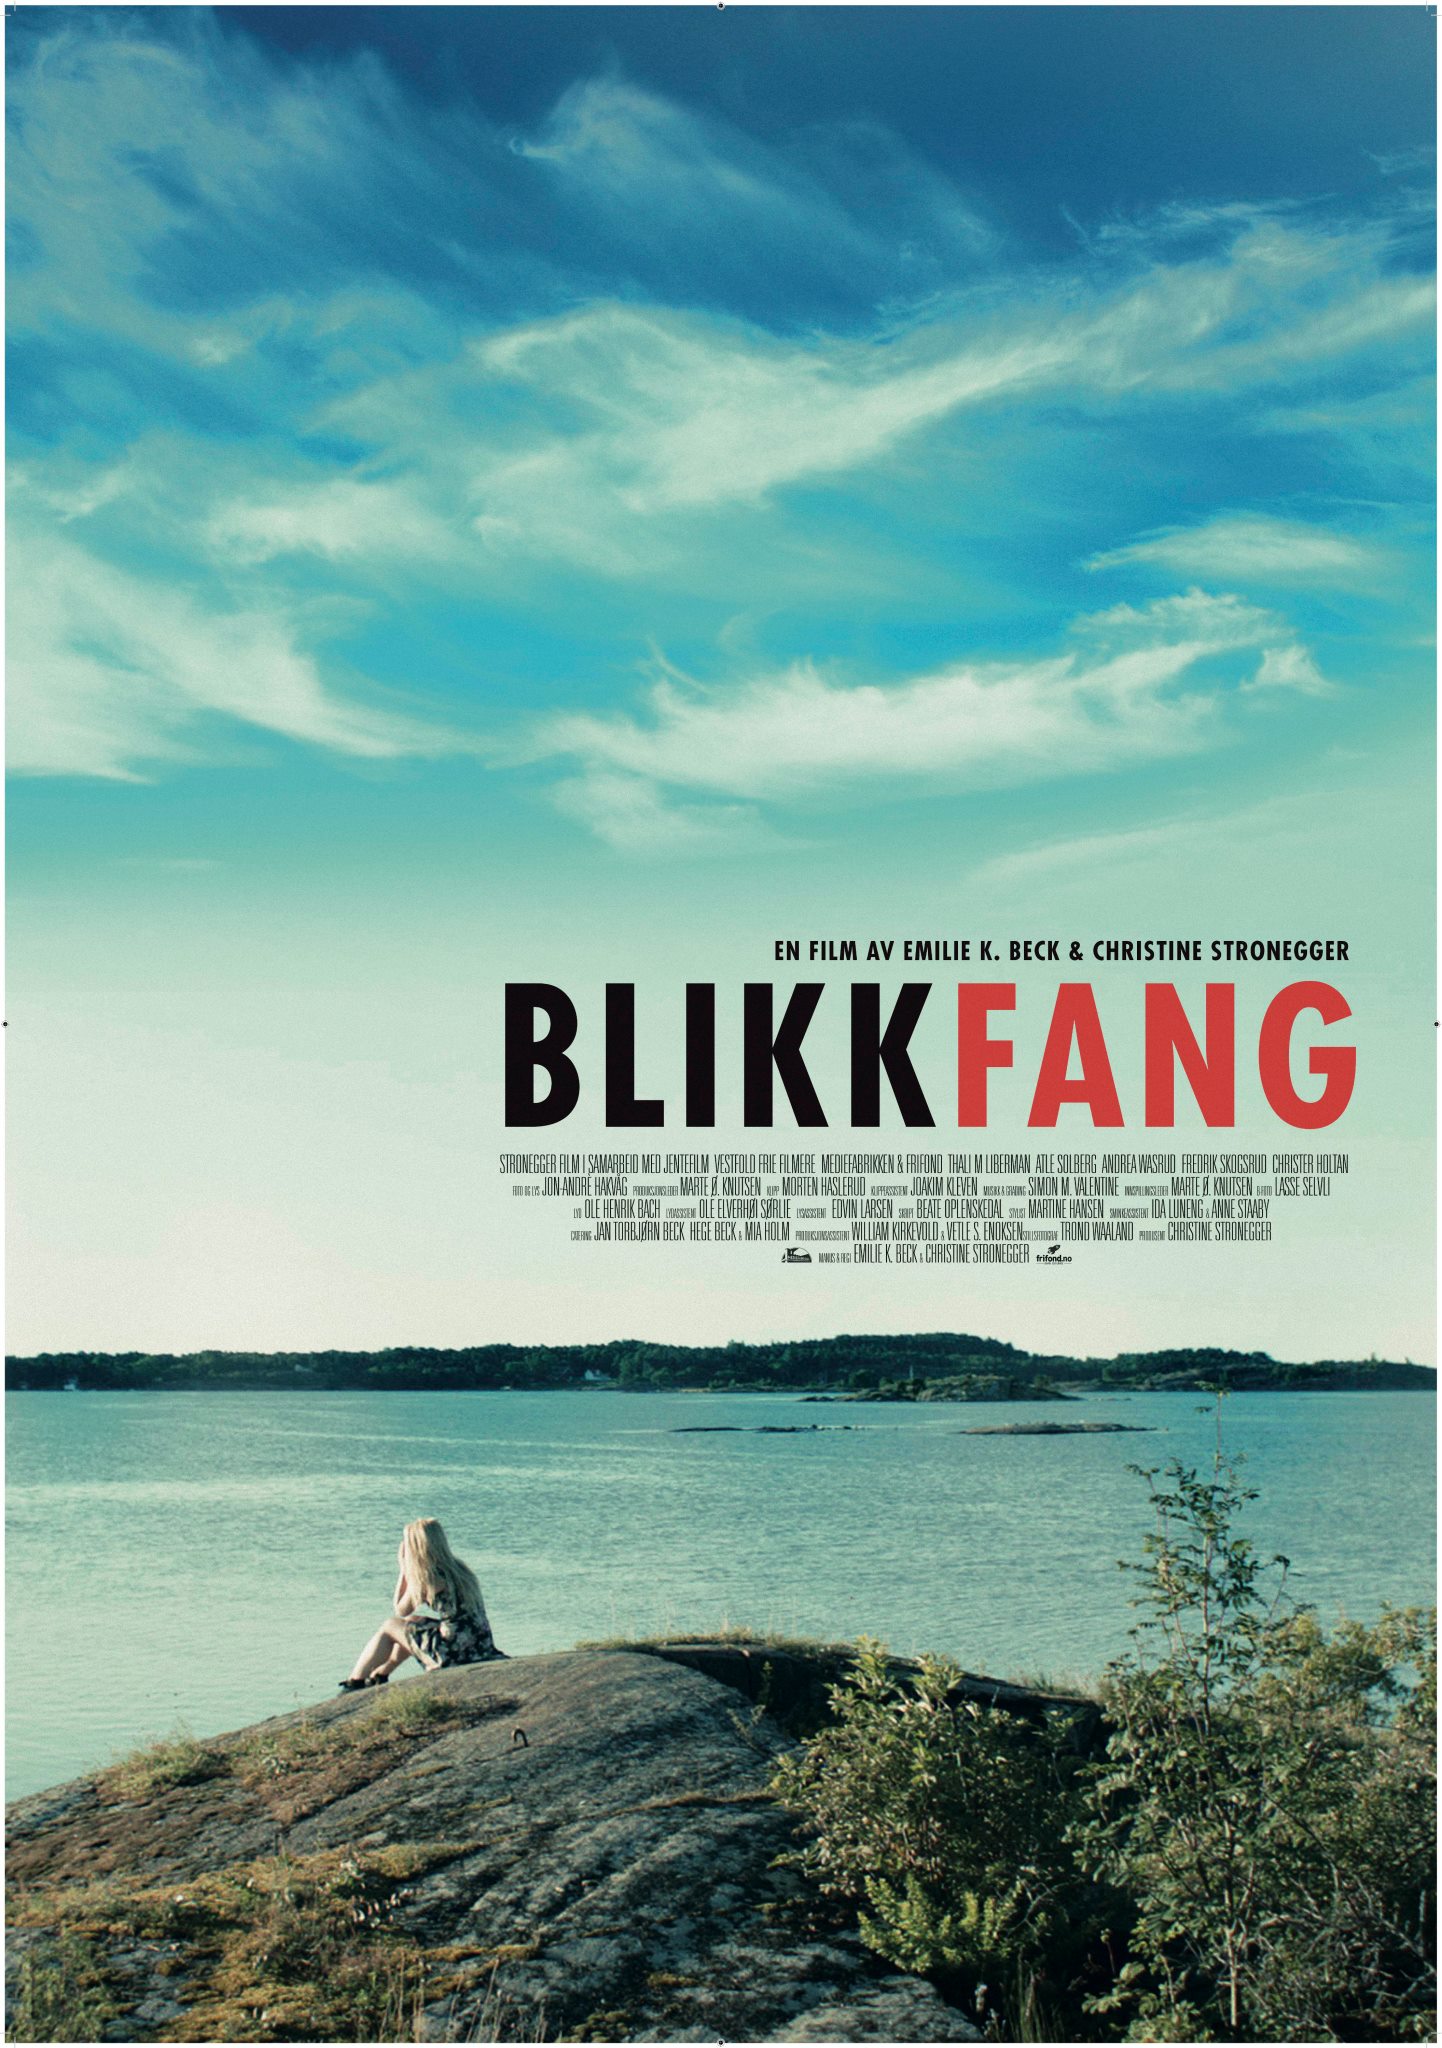 BLIKKFANG A short film written and directed by Christine Stronegger and Emilie K. Beck